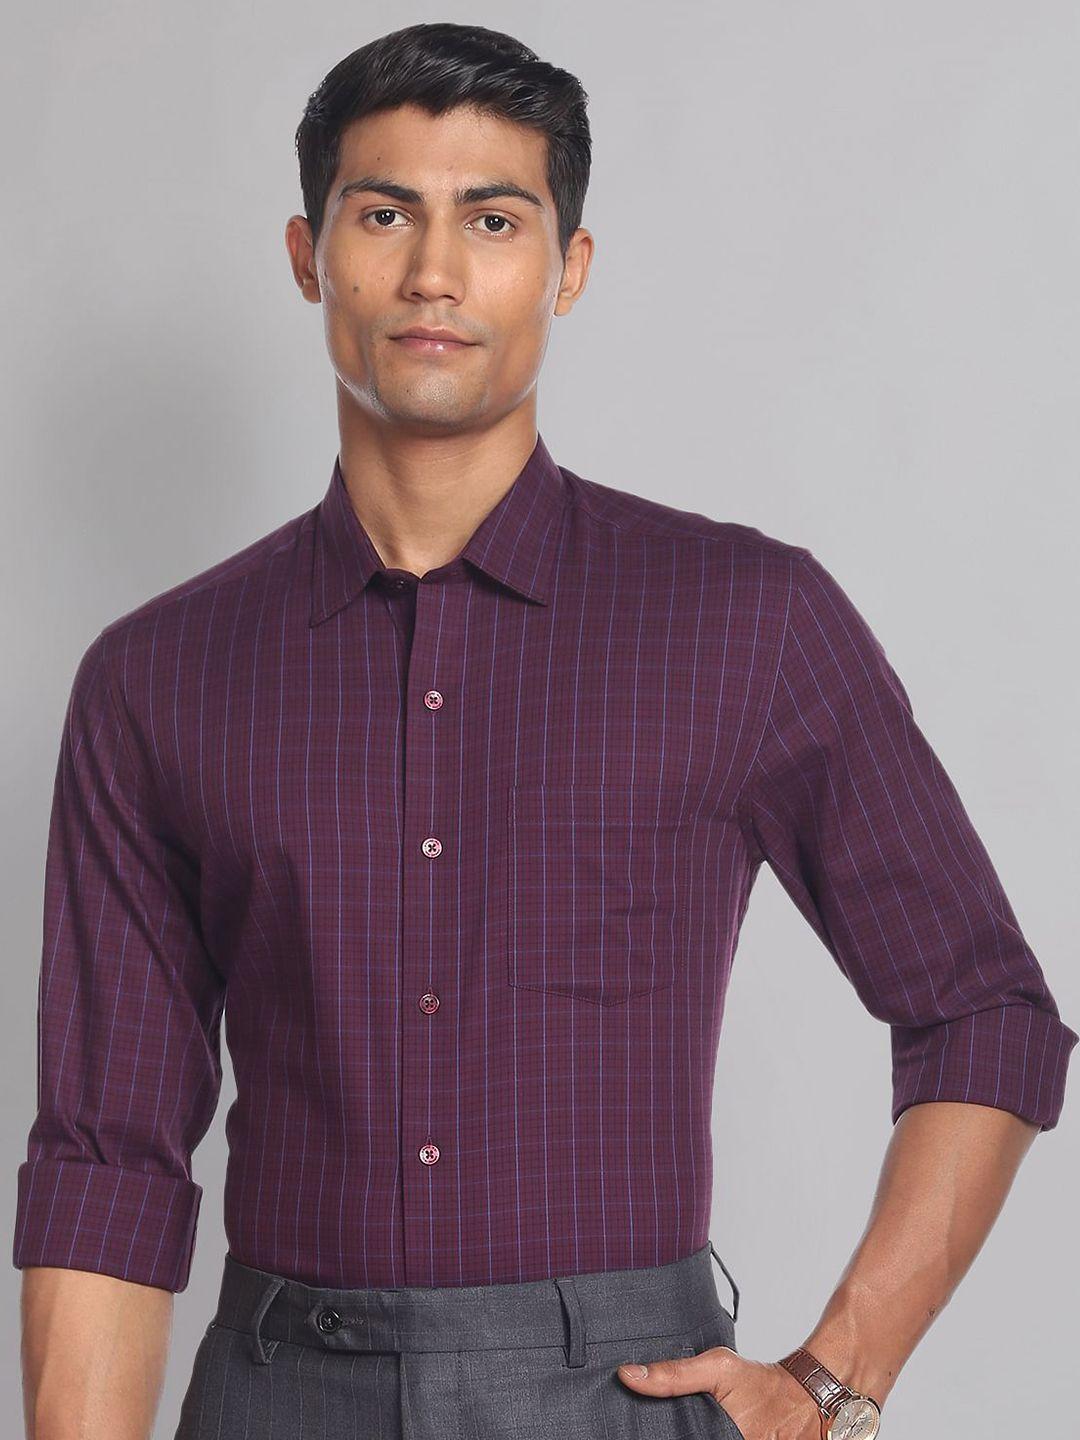 ad by arvind checked slim fit formal shirt